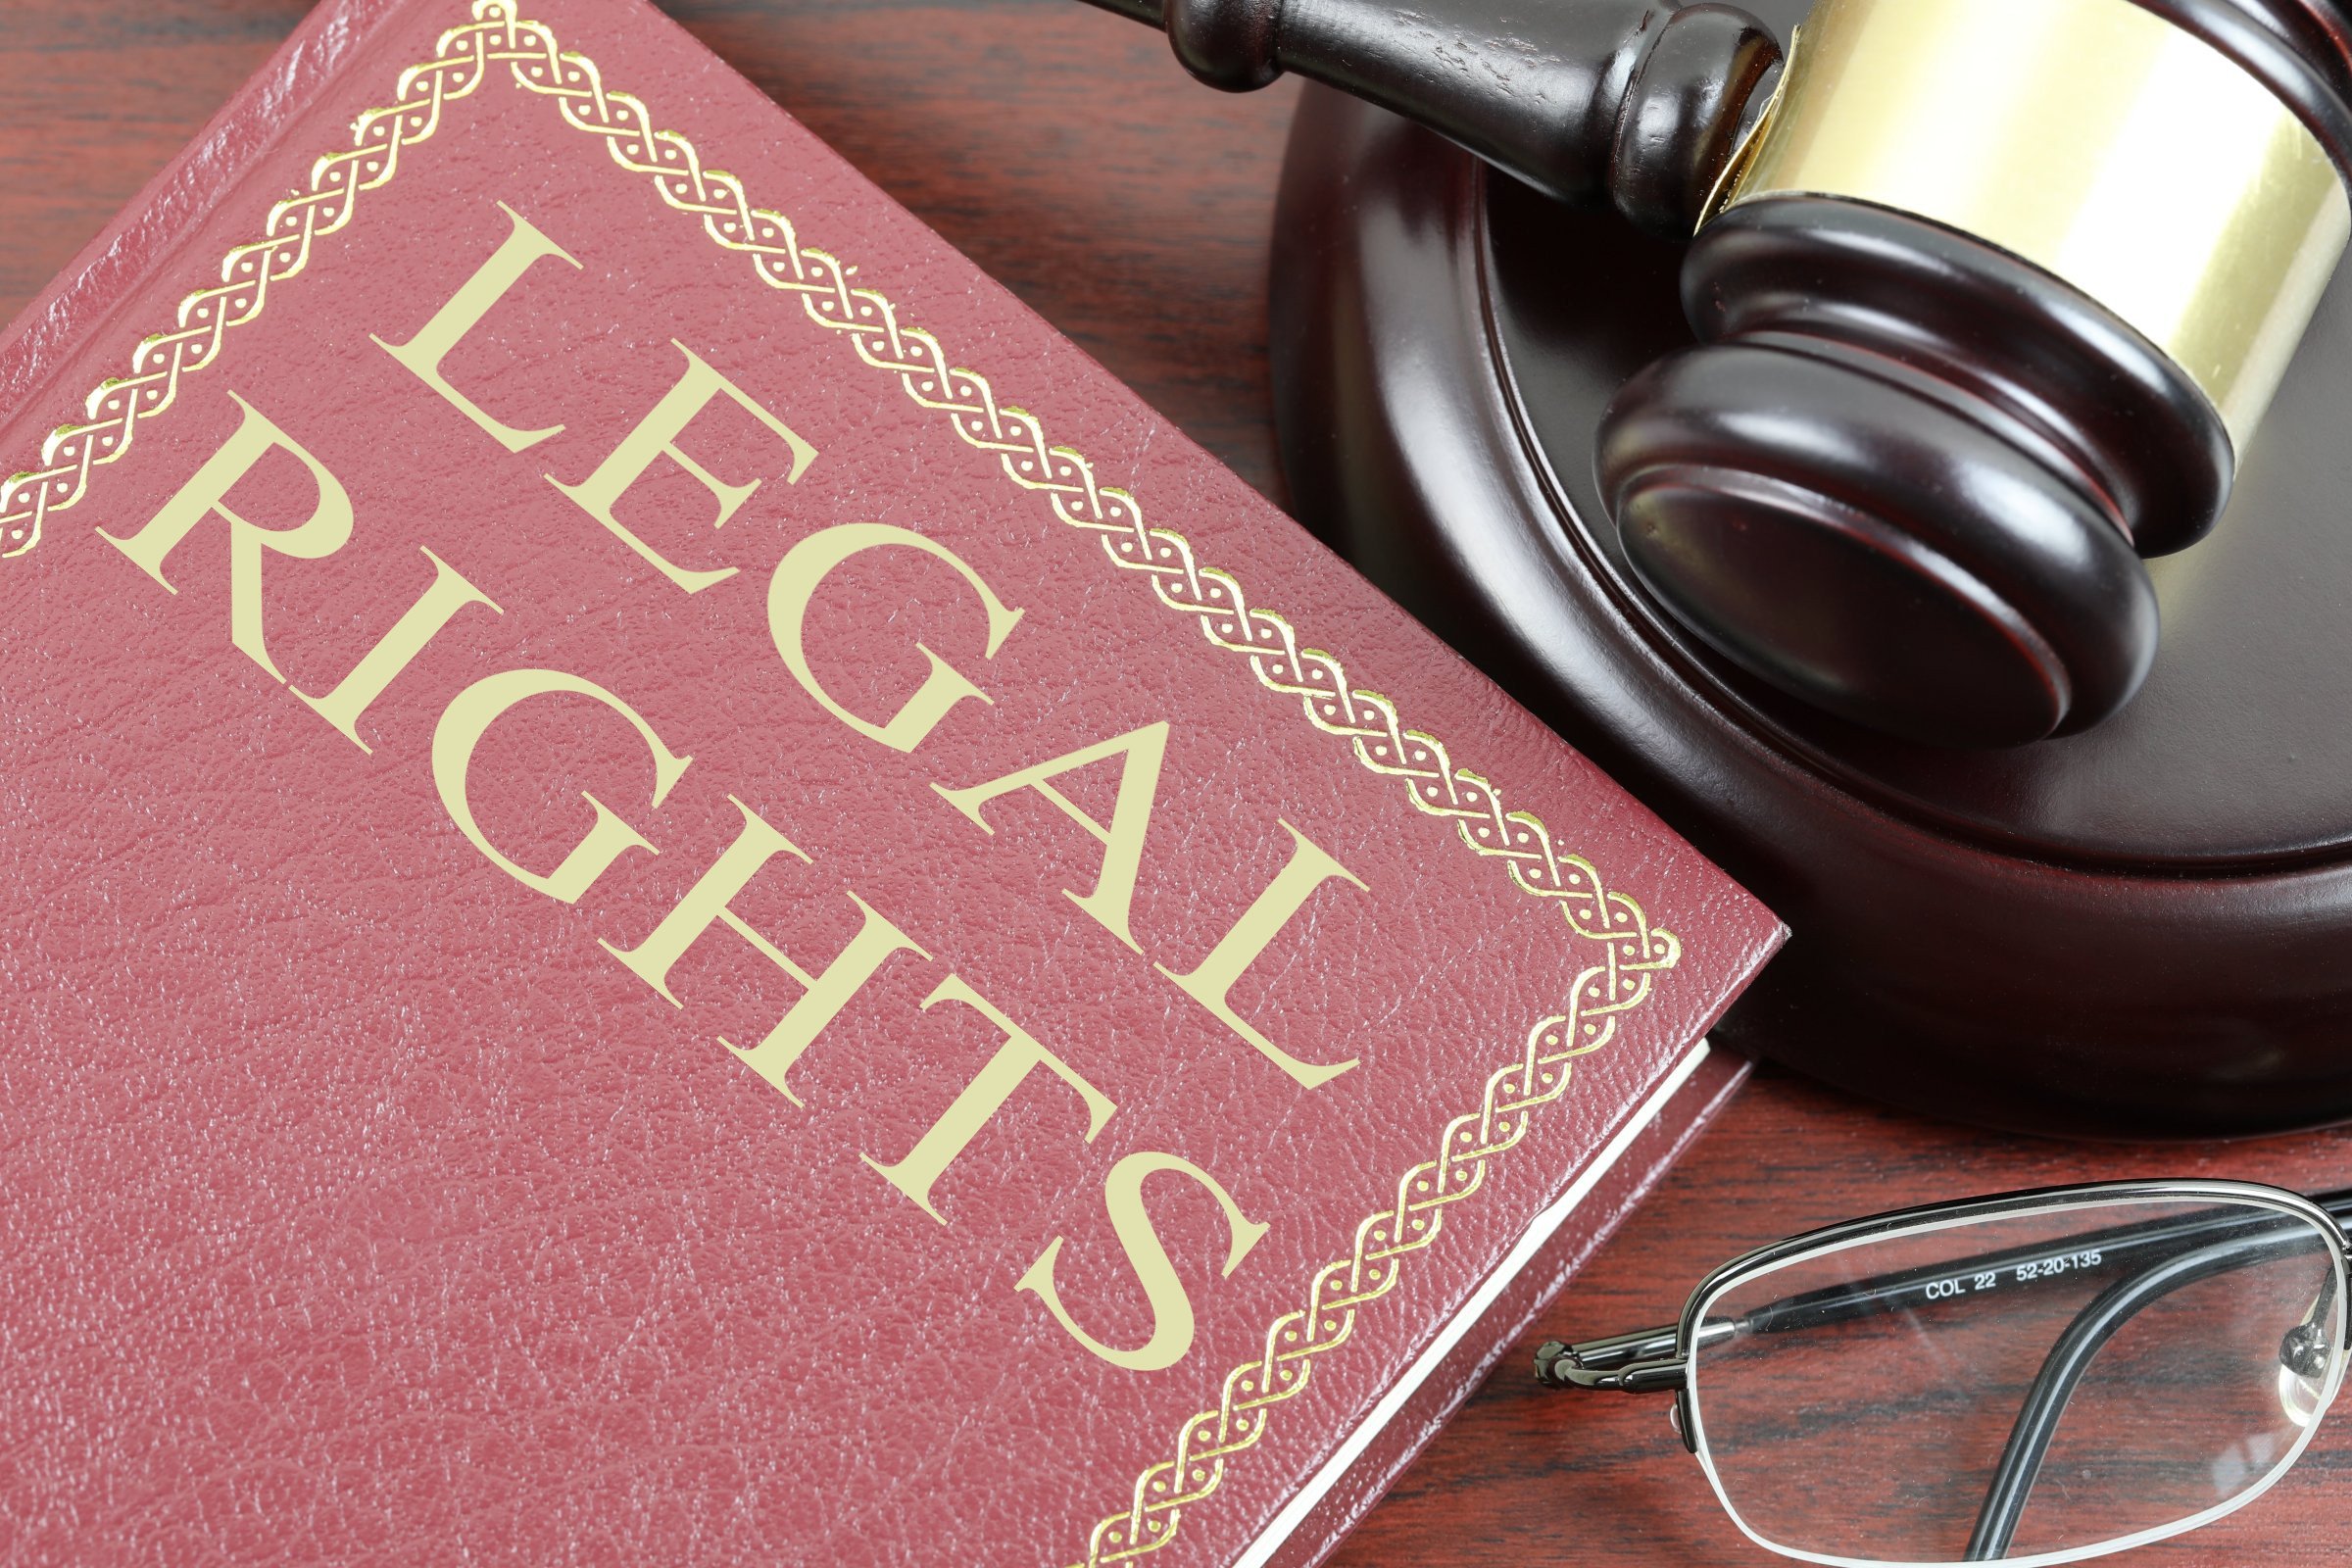 legal rights